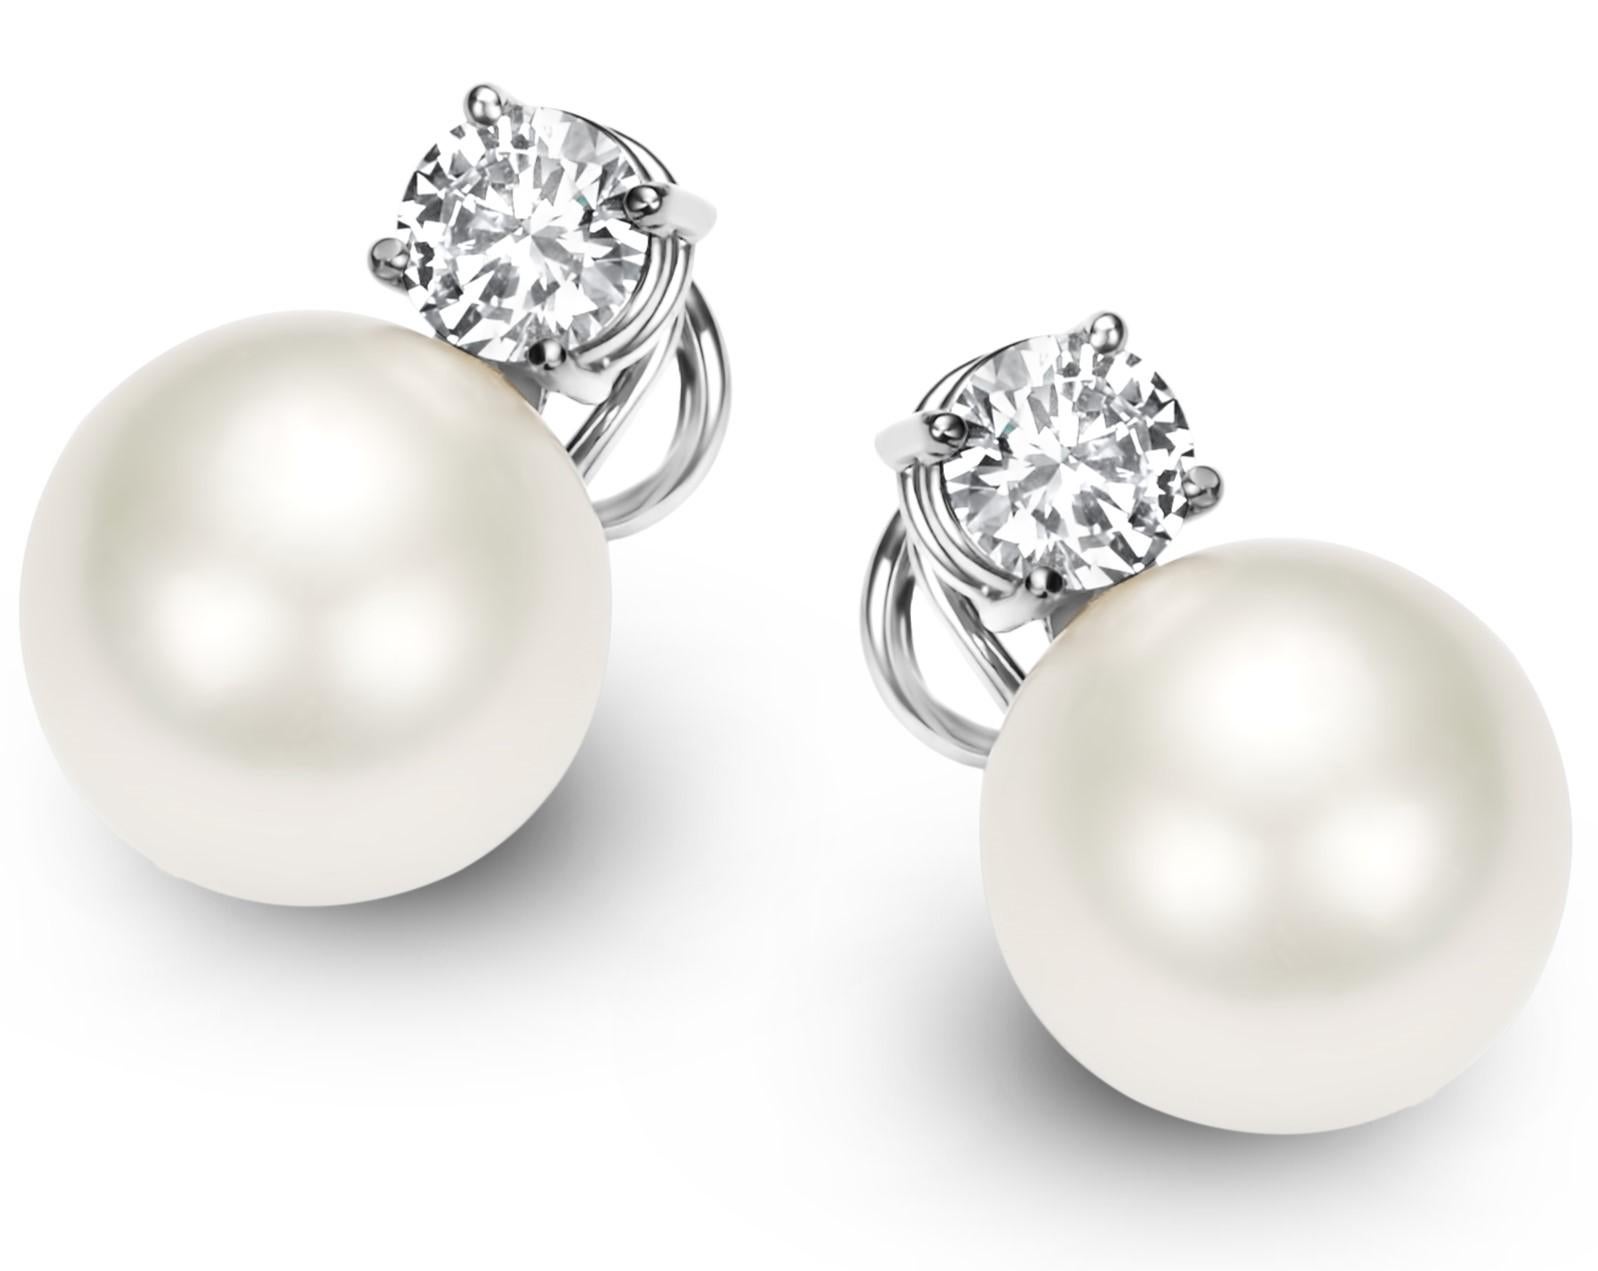 18 Kt. White Gold Earrings, South Sea Pearls & 2*0.9Ct Diamonds

Diamonds: Brilliant cut diamonds, 2 * 0.9 ct. diamonds, together 1.8 ct.

Pearl: 2 South sea pearls, diameter 14.9 mm

Material: 18 kt. White gold

Measurements: 21.6 mm x 14.9 mm x 23